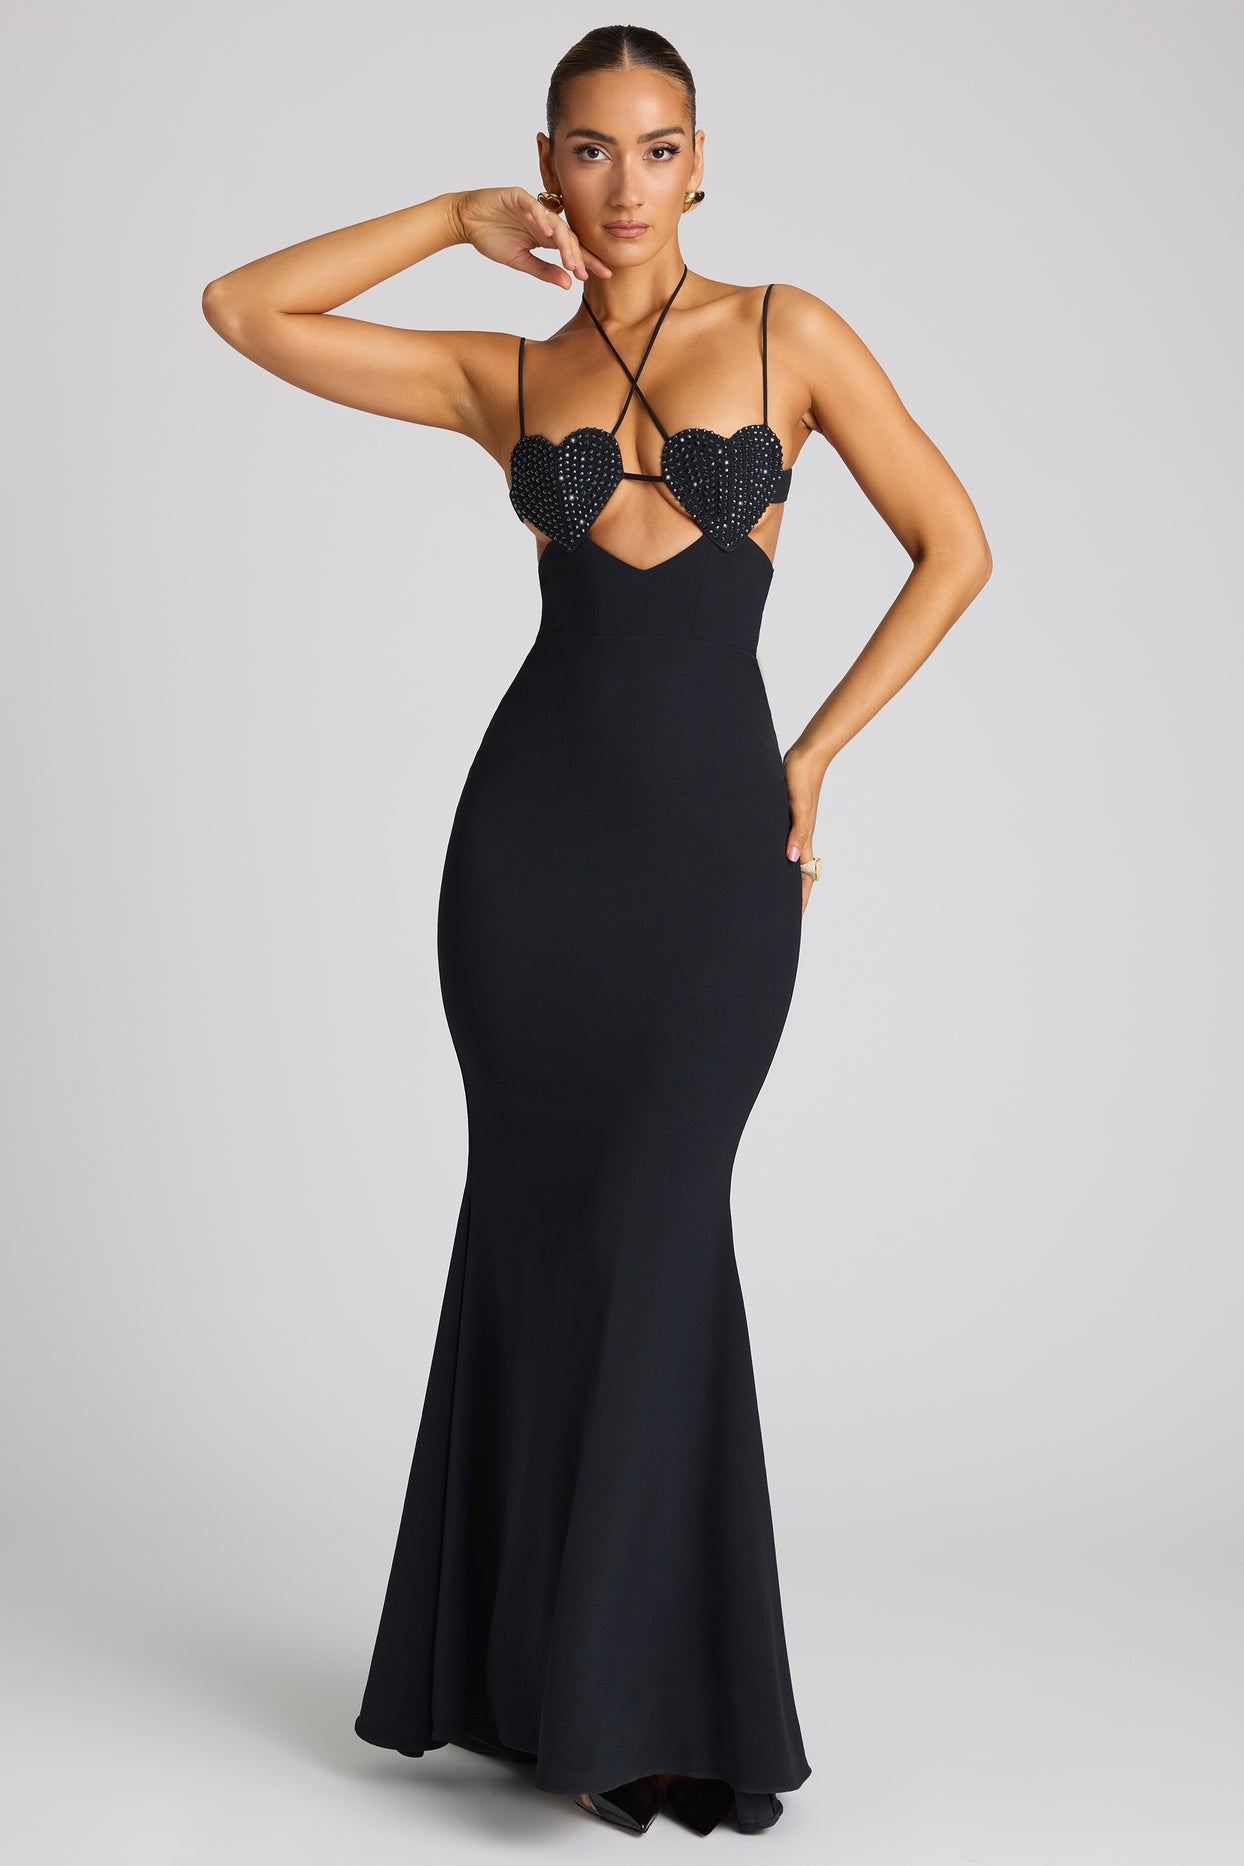 Embellished Heart Cup Detail Evening Gown in Black